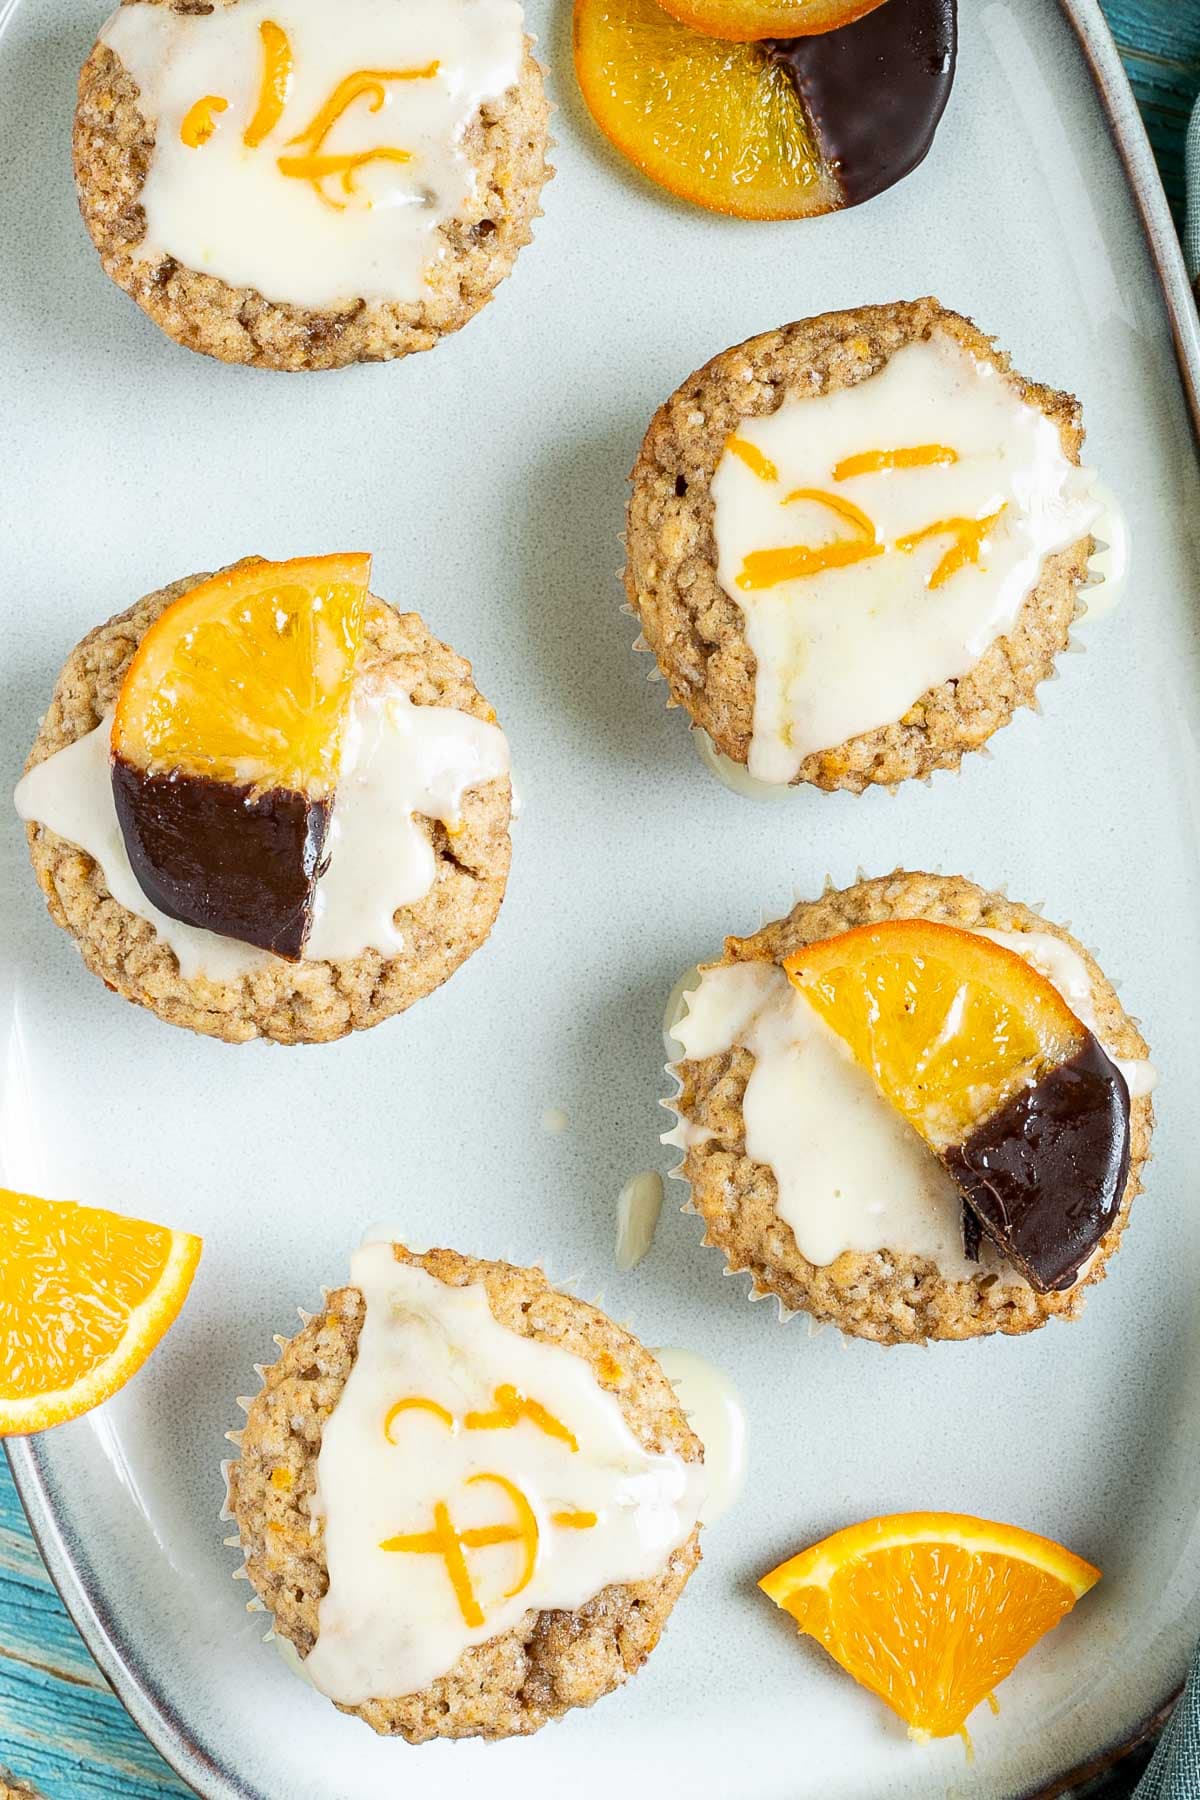 Several orange muffins on a light blue plate topped with a white glaze and orange slices partly dipped in chocolate or white glaze with orange zest pieces. Orange slices are scattered around them.